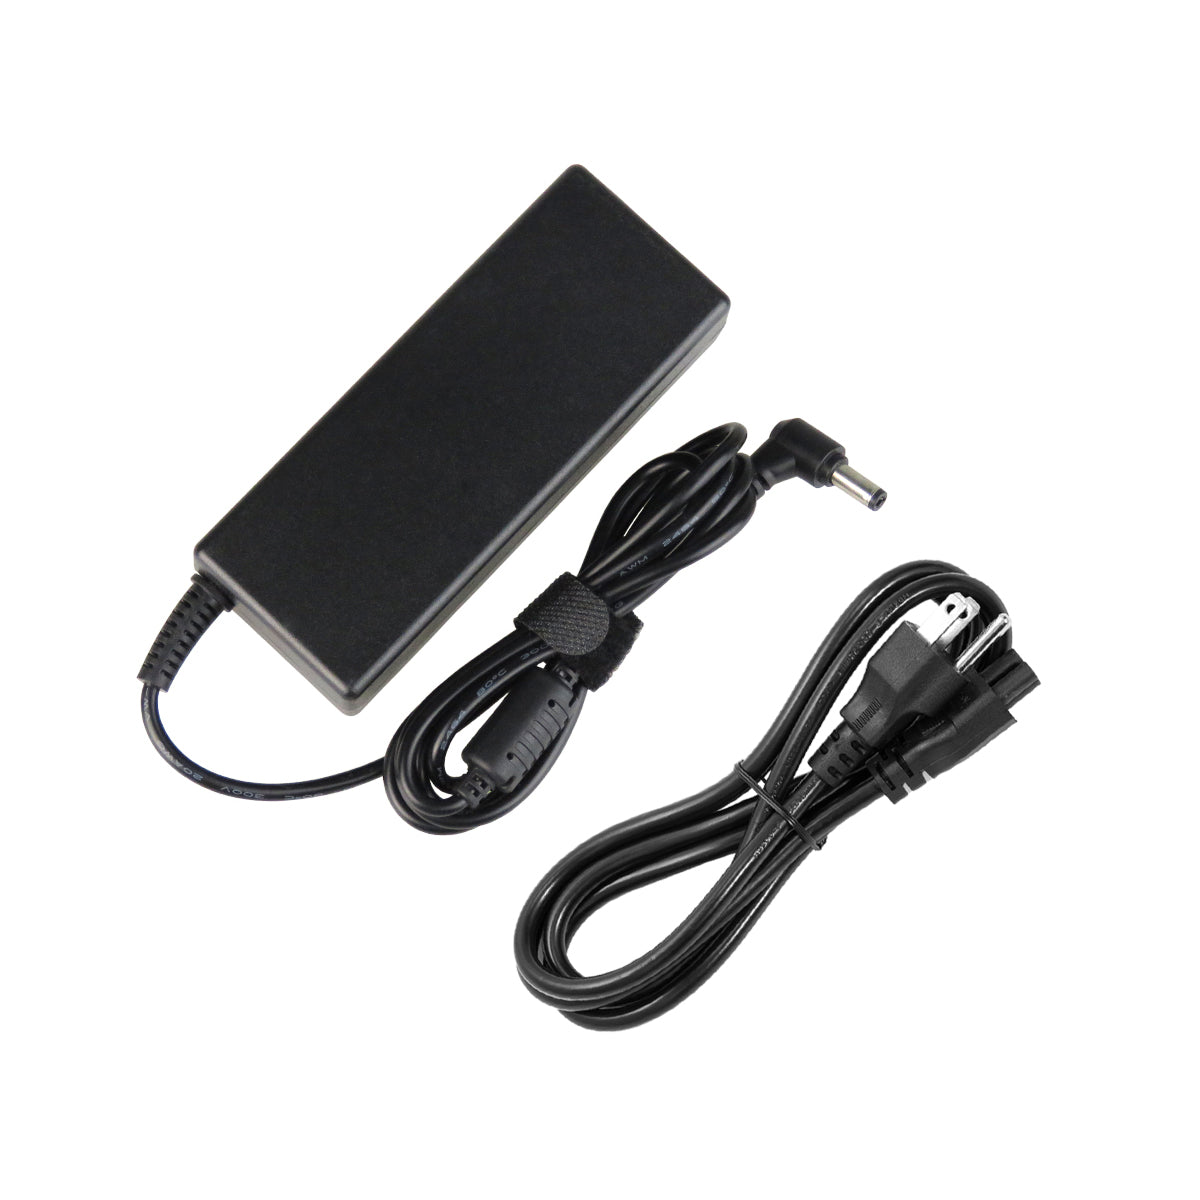 AC Adapter Charger for ASUS K55DR Notebook.